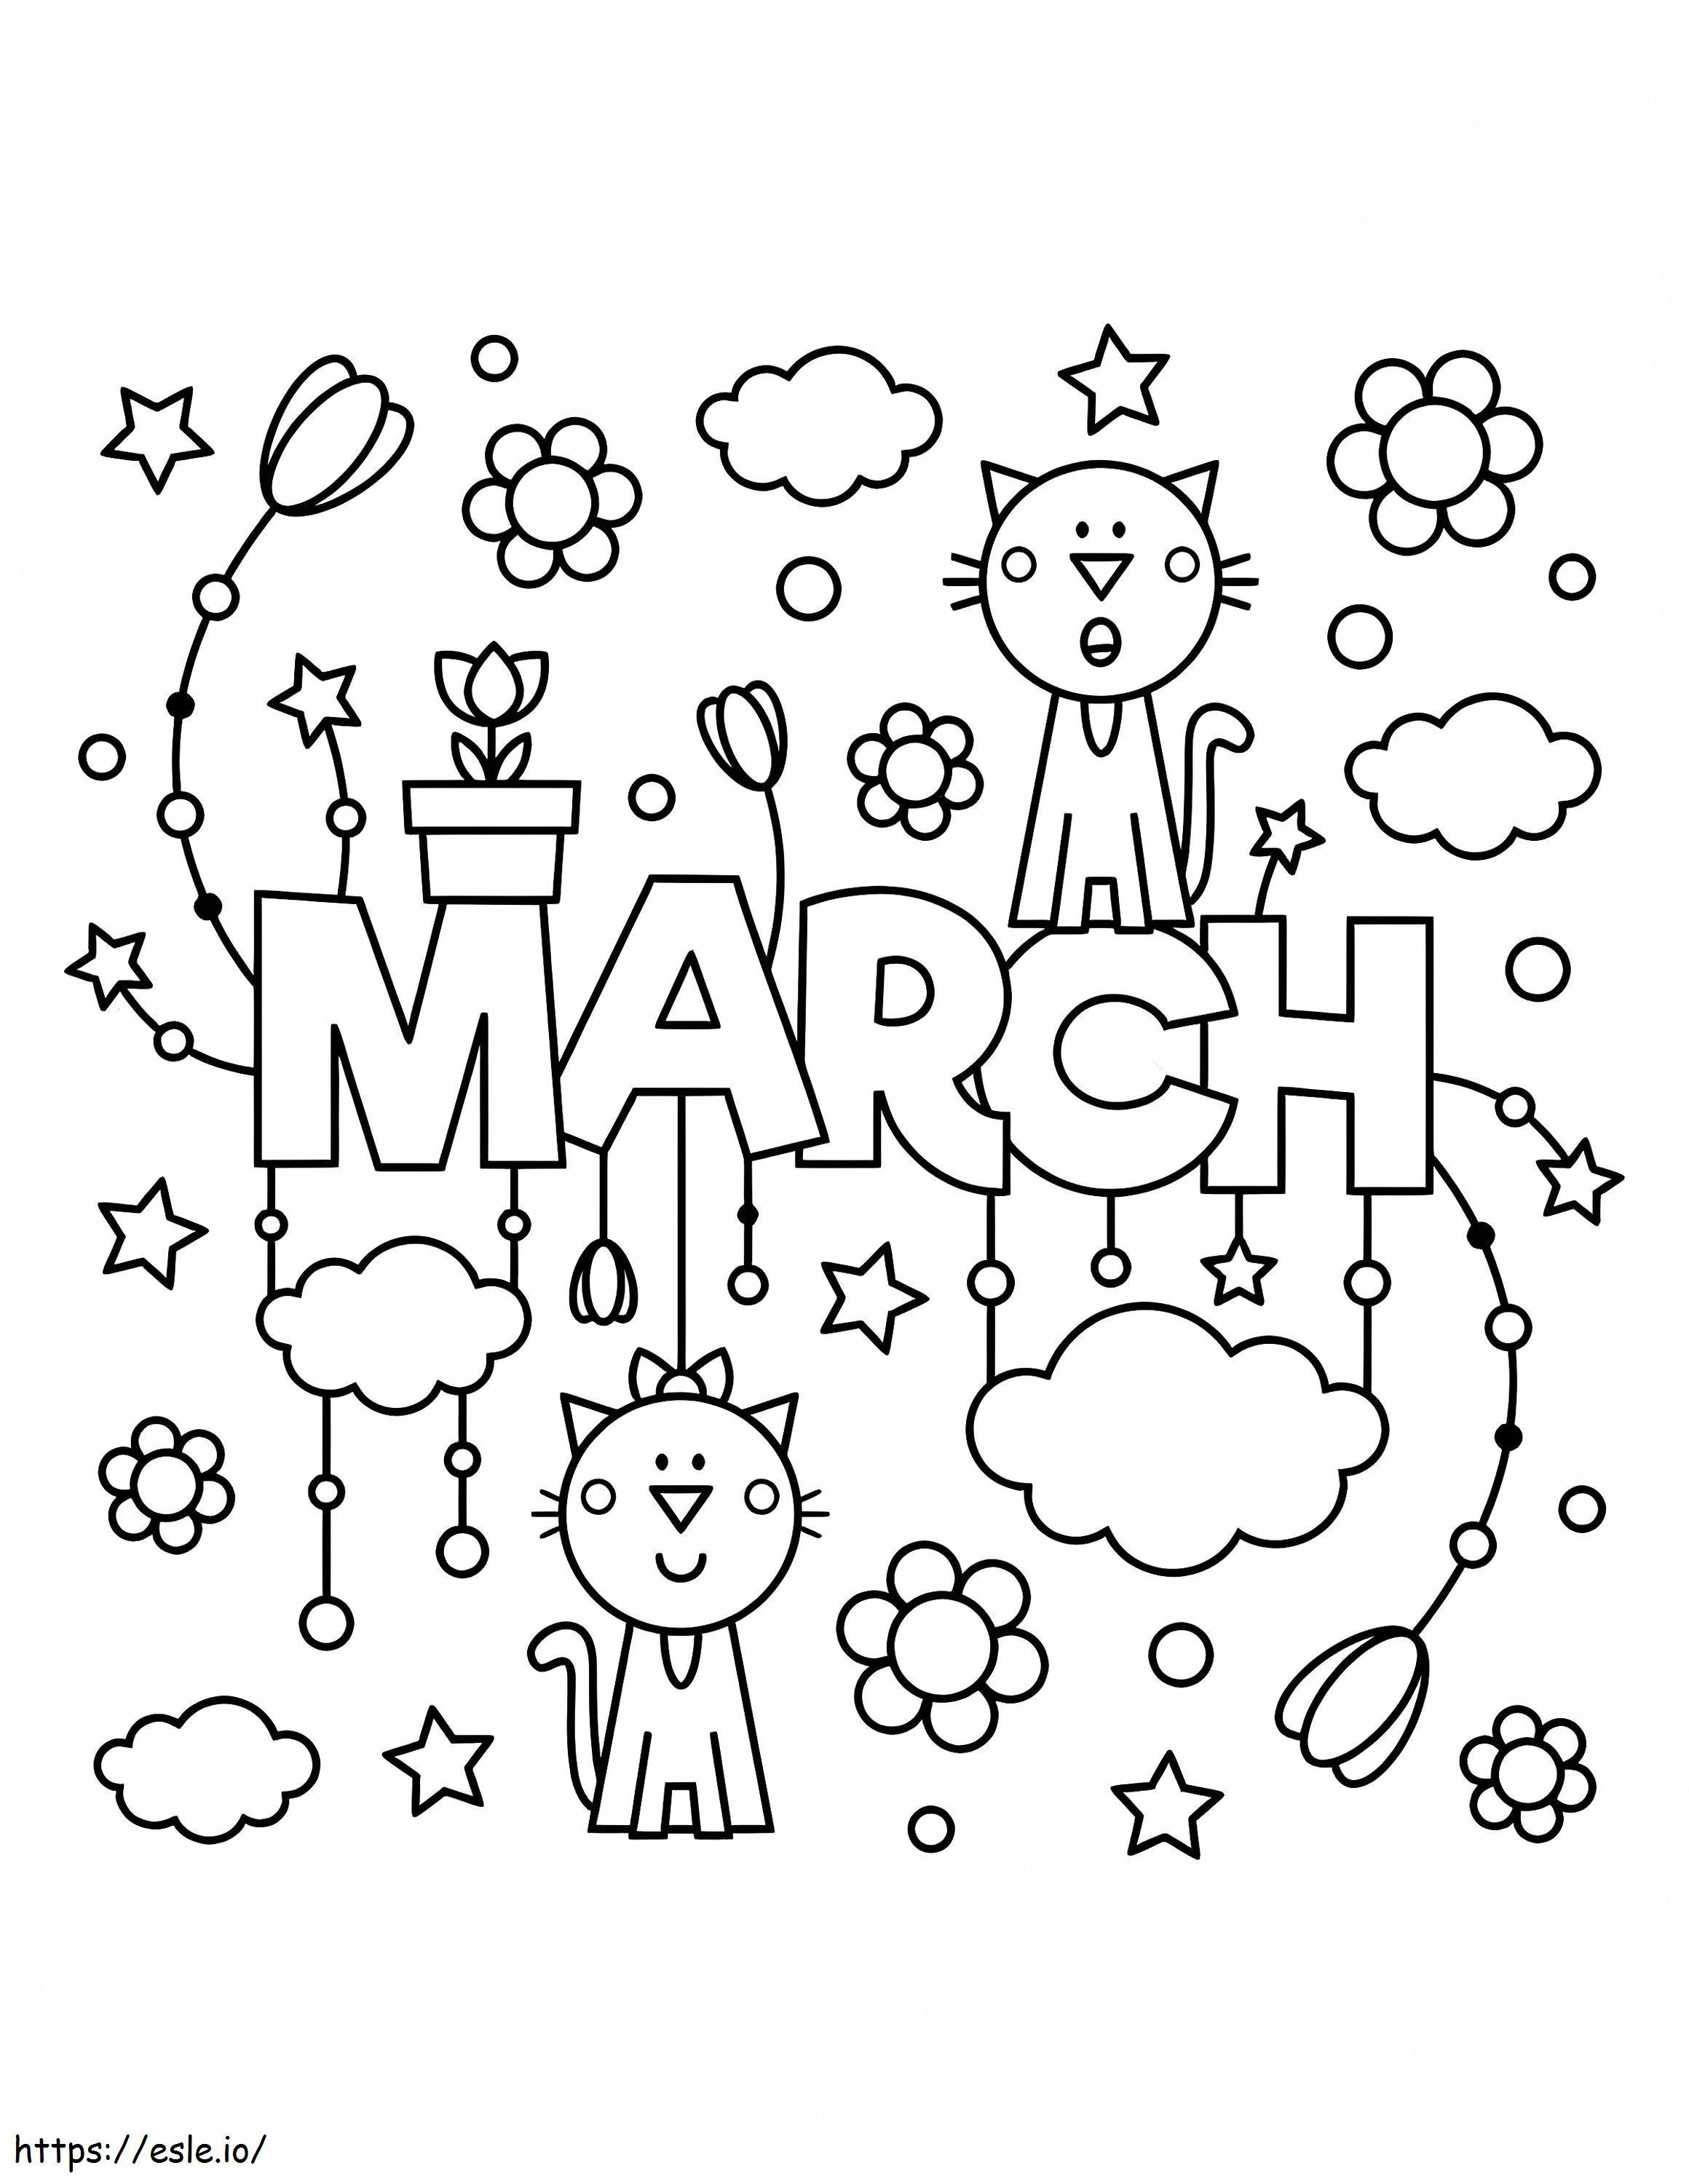 March 1 coloring page